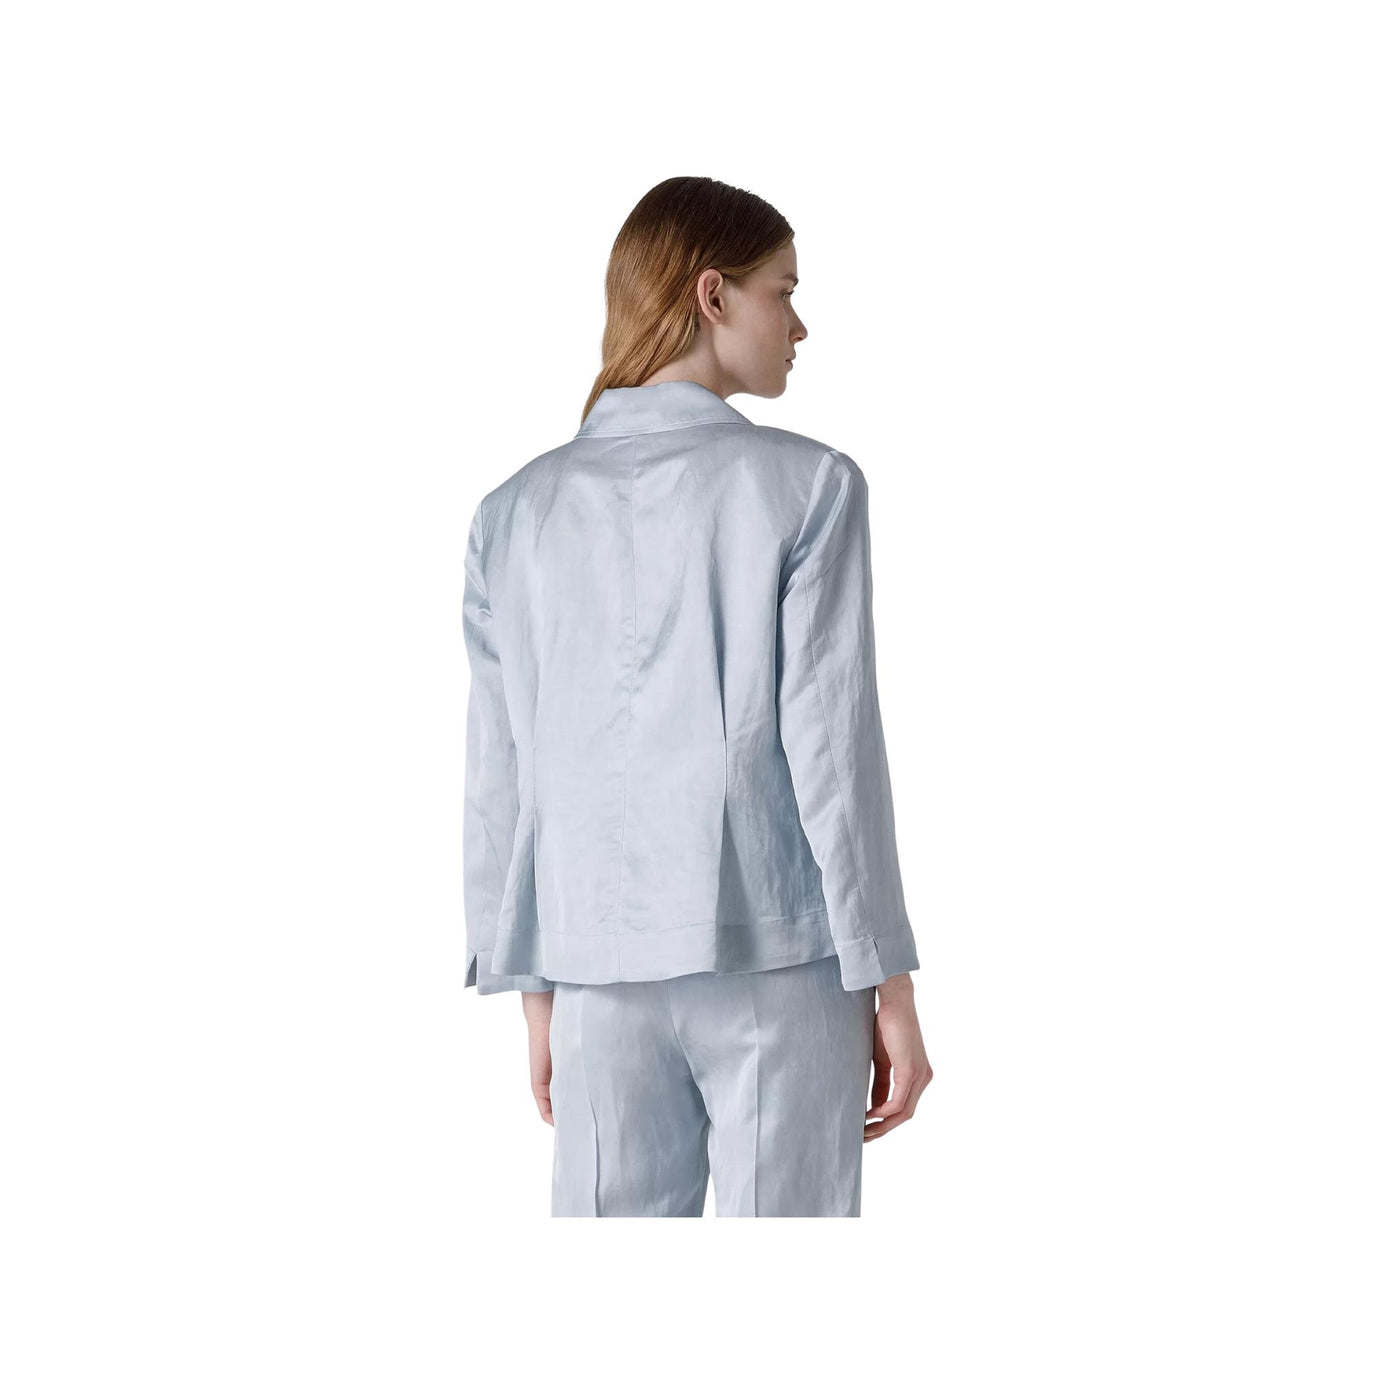 Women's jacket with three button closure